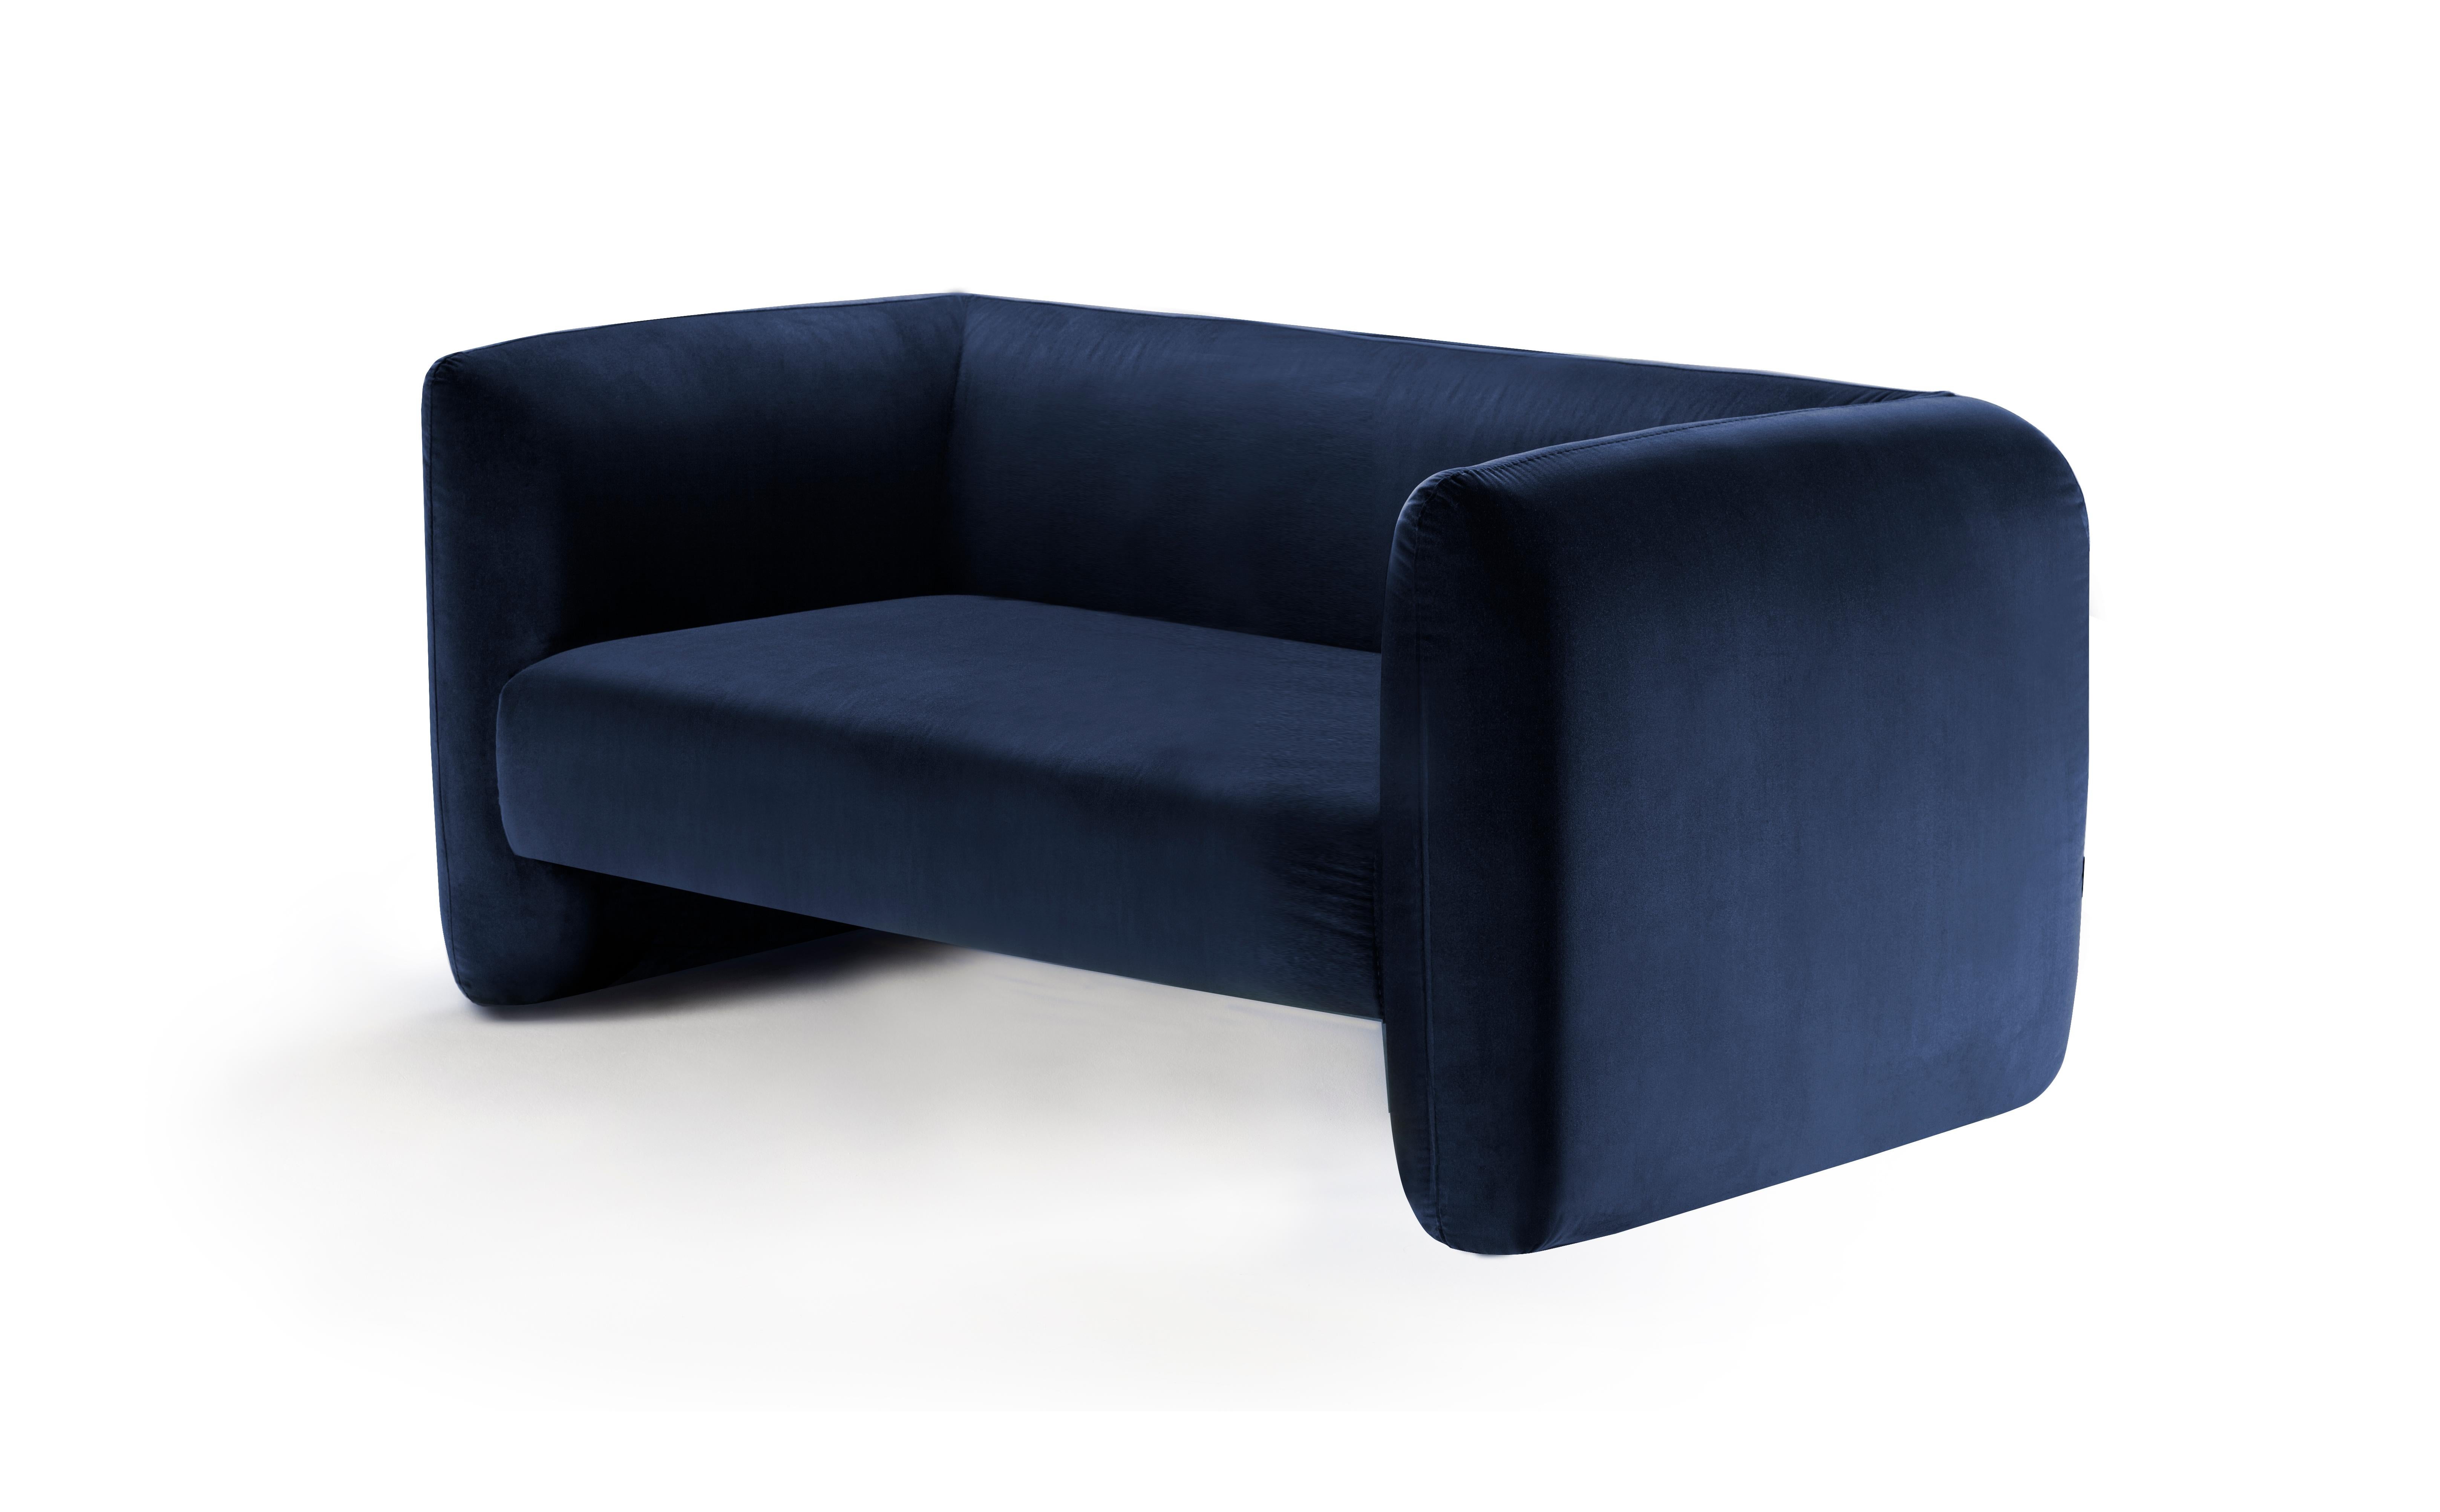 Portuguese Contemporary Modern Jacob Sofa in Deep Blue Velvet Fabric by Collector Studio For Sale